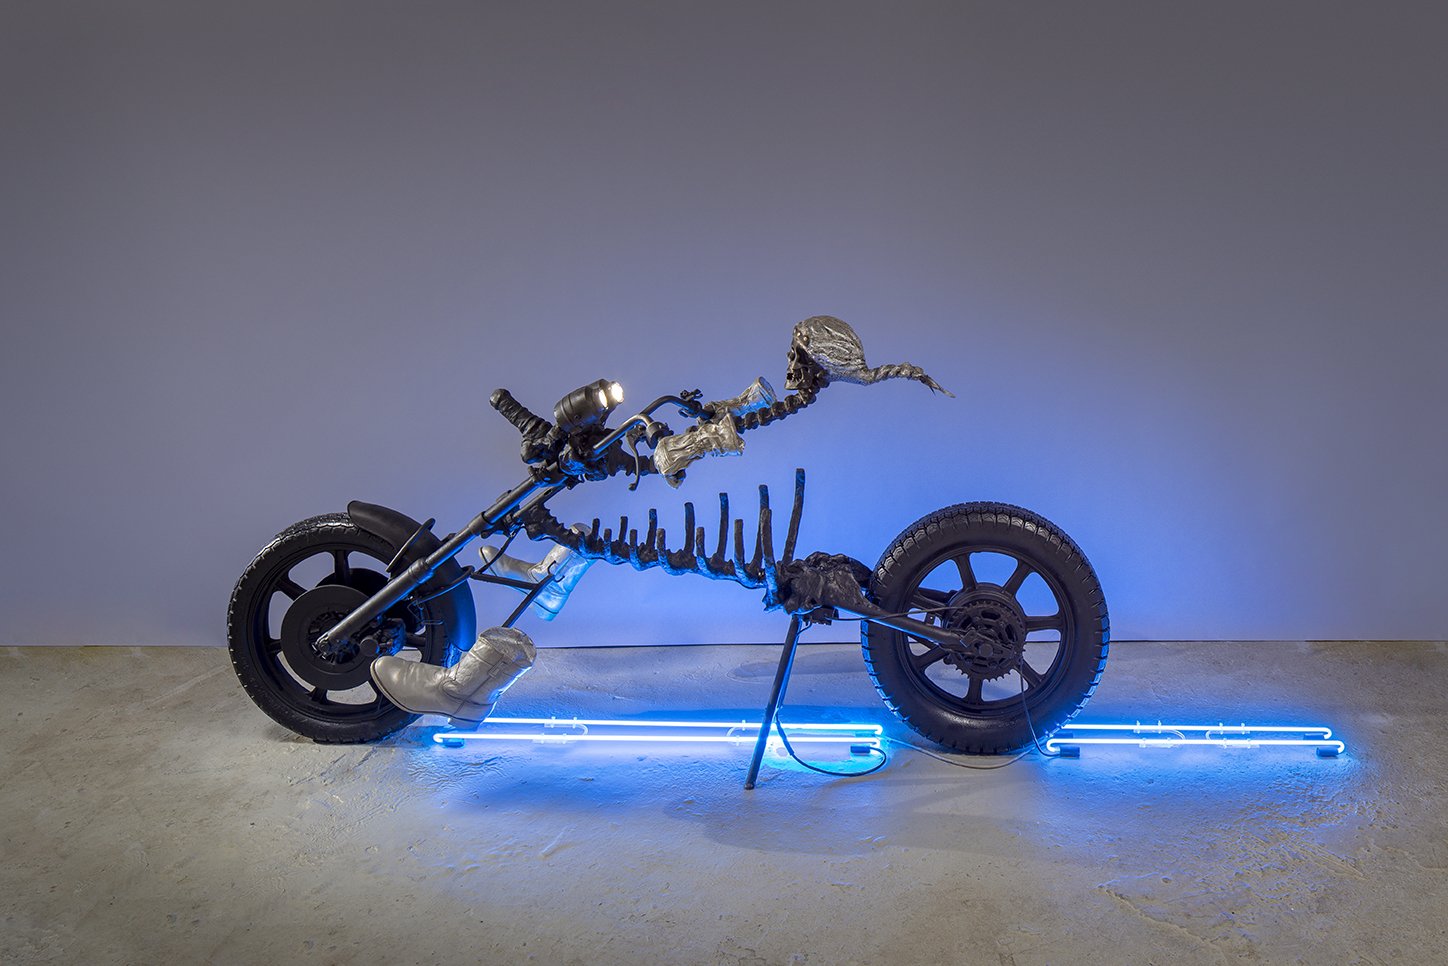  Marsha Pels,  Dead Cowboy  (detail), 2007-2008. Cast epoxy resin, cast rubber, deconstructed motorcycle, steel, neon lights, argon- mercury text on wall. 48 x 120.5 x 36 inches. 